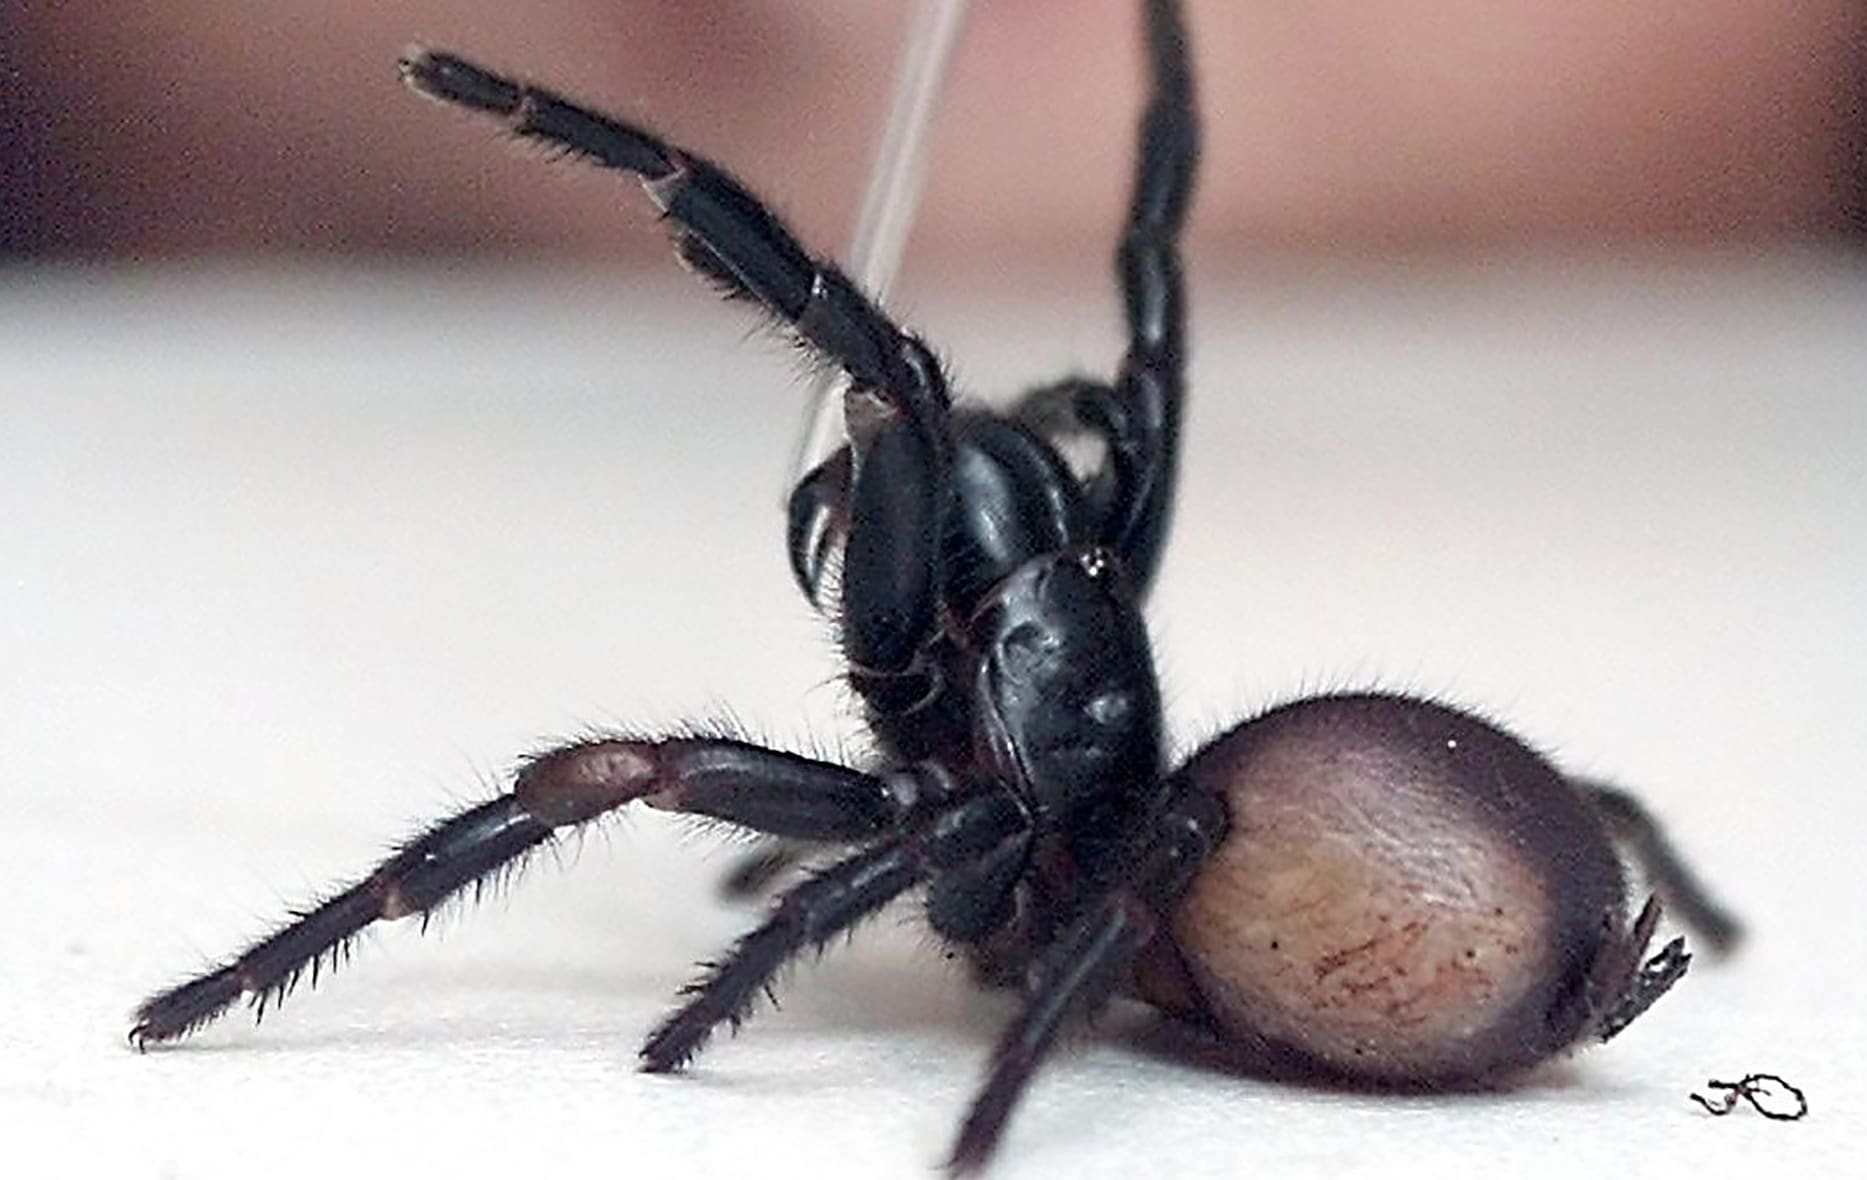 A deadly funnel-web spider is milked for its venom at the Australian Reptile Park in Sydney.